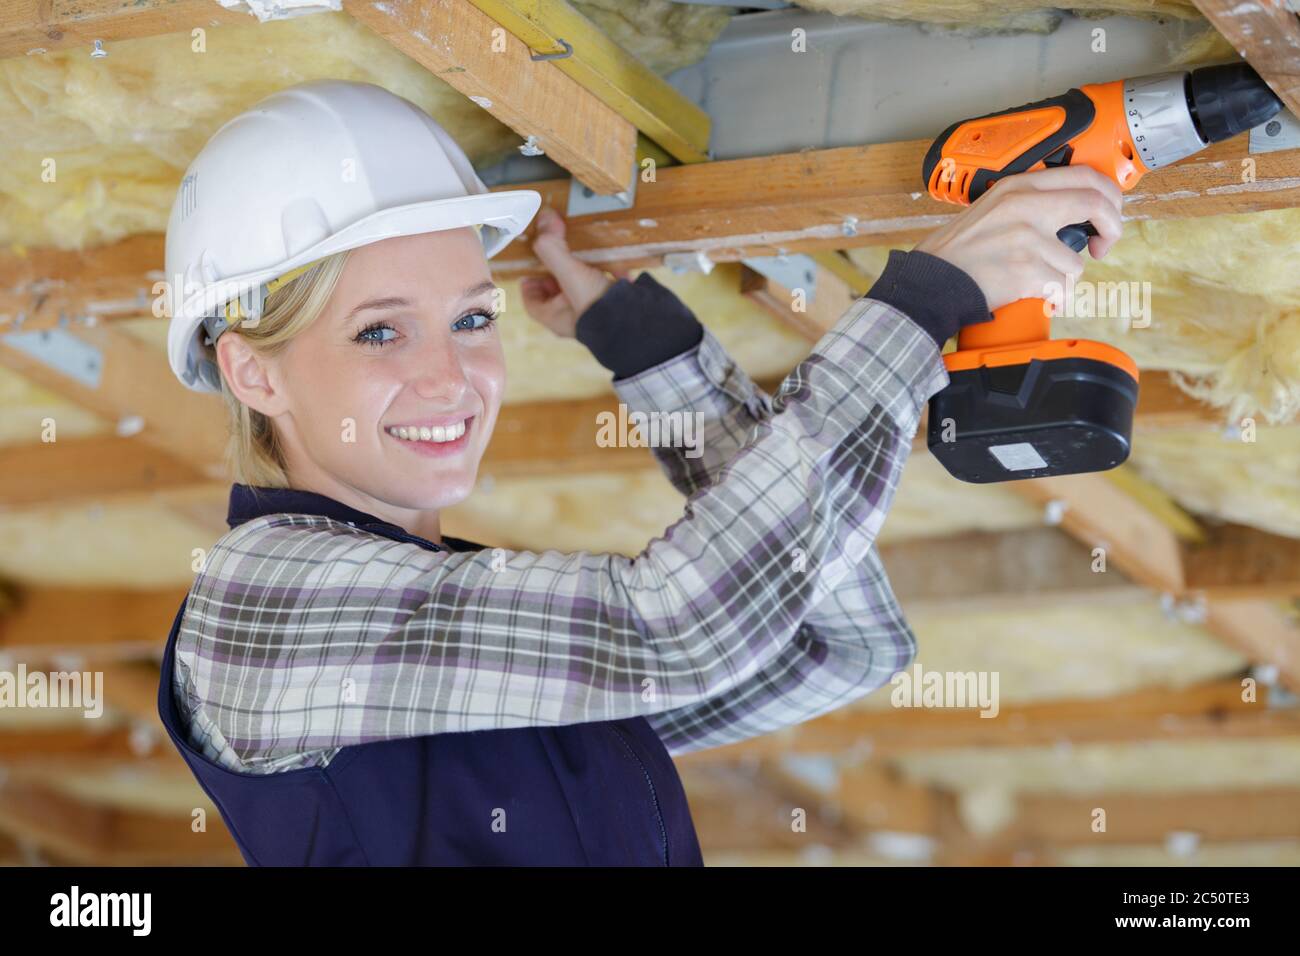 Female Carpenter Drilling Wooden Roof At Construction Site Stock Photo Alamy